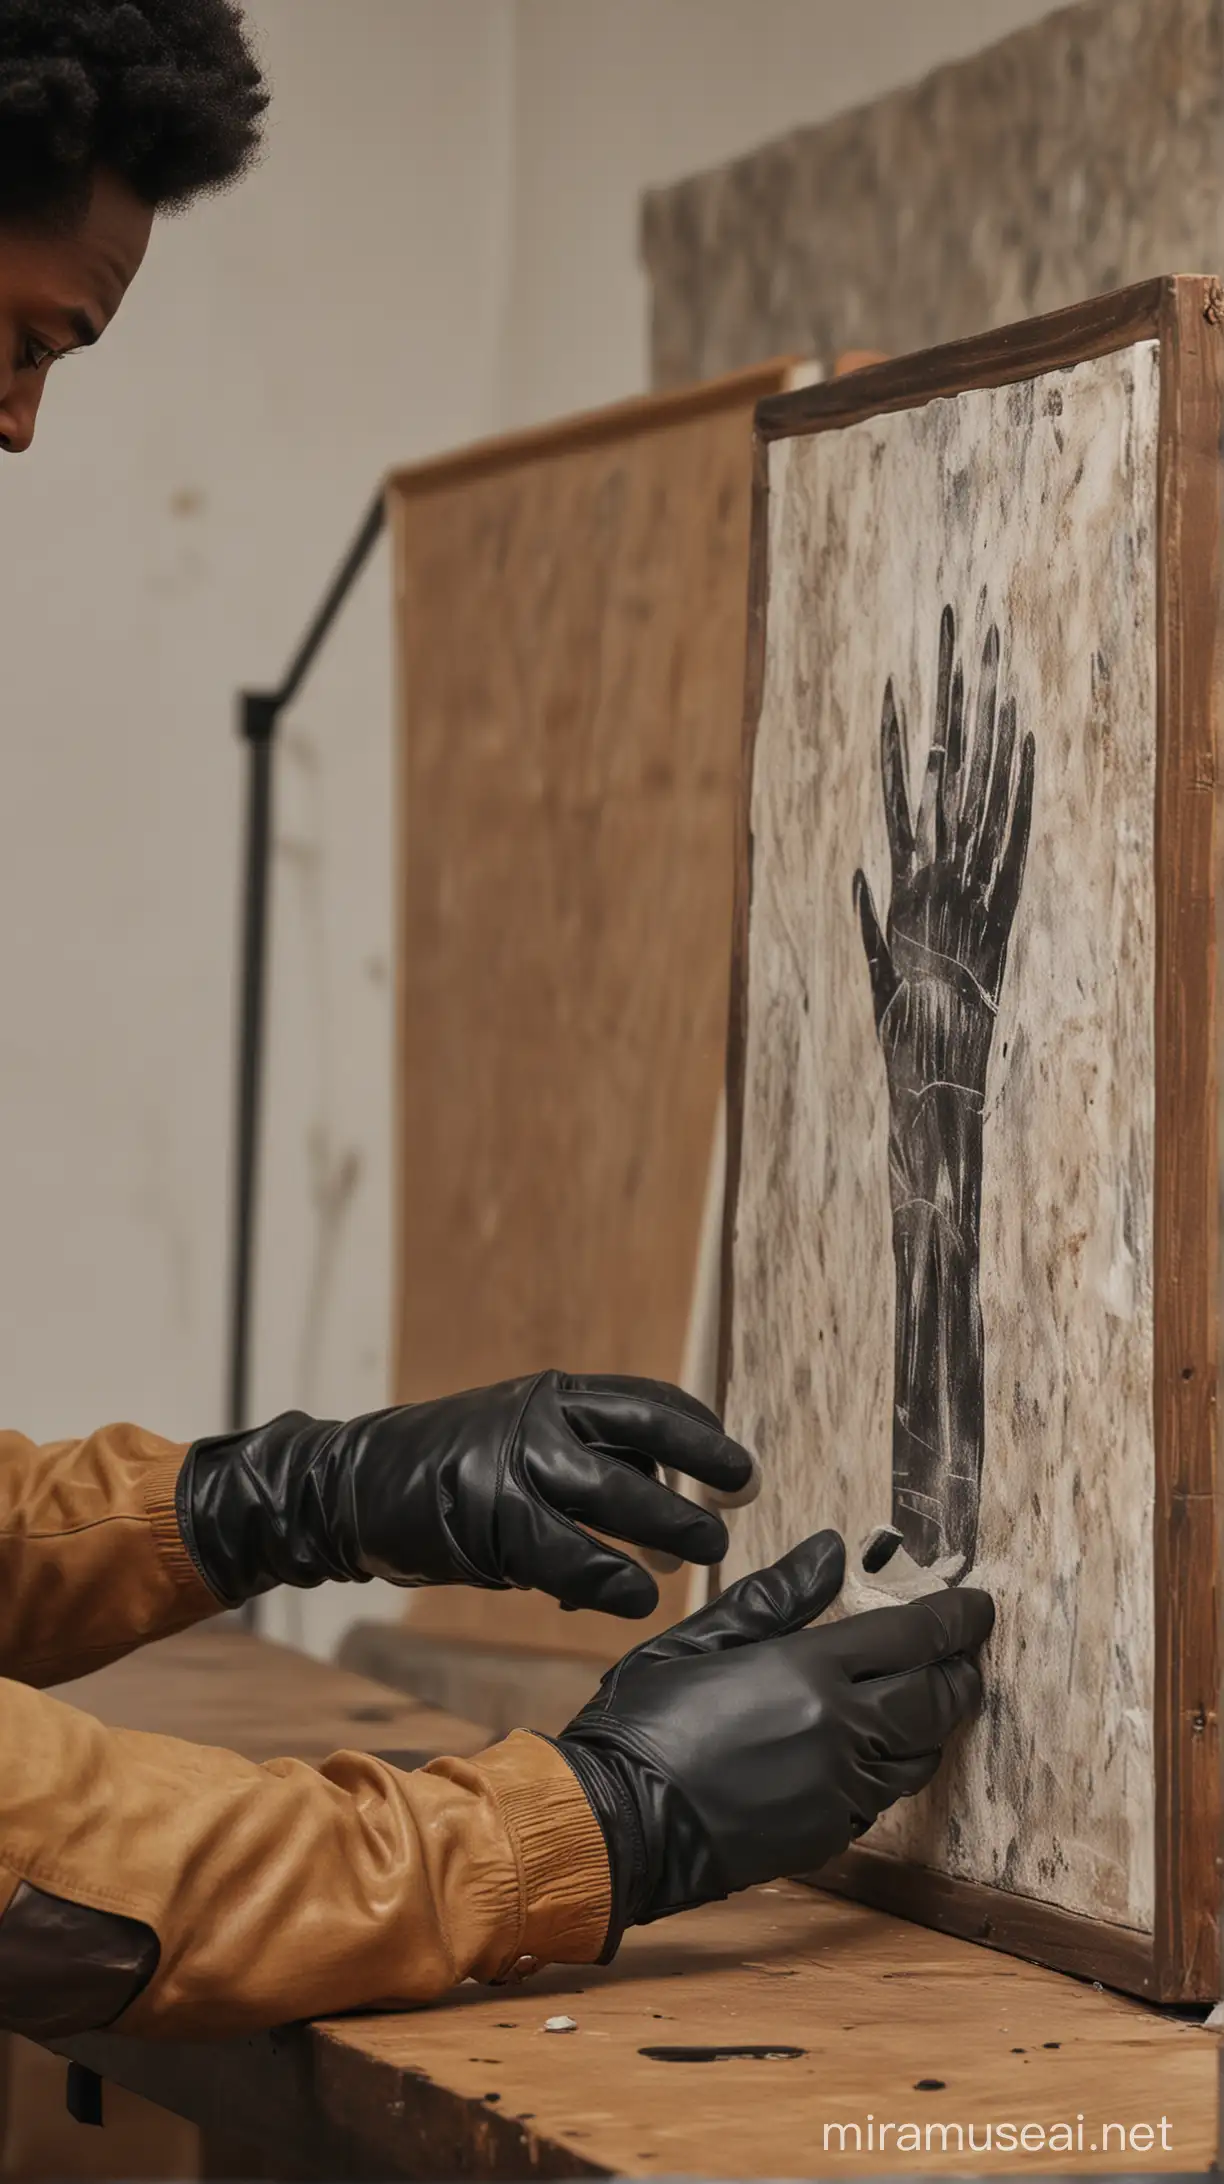 close-up shot of a black person with gloves on trying to lift an artwork from a table
